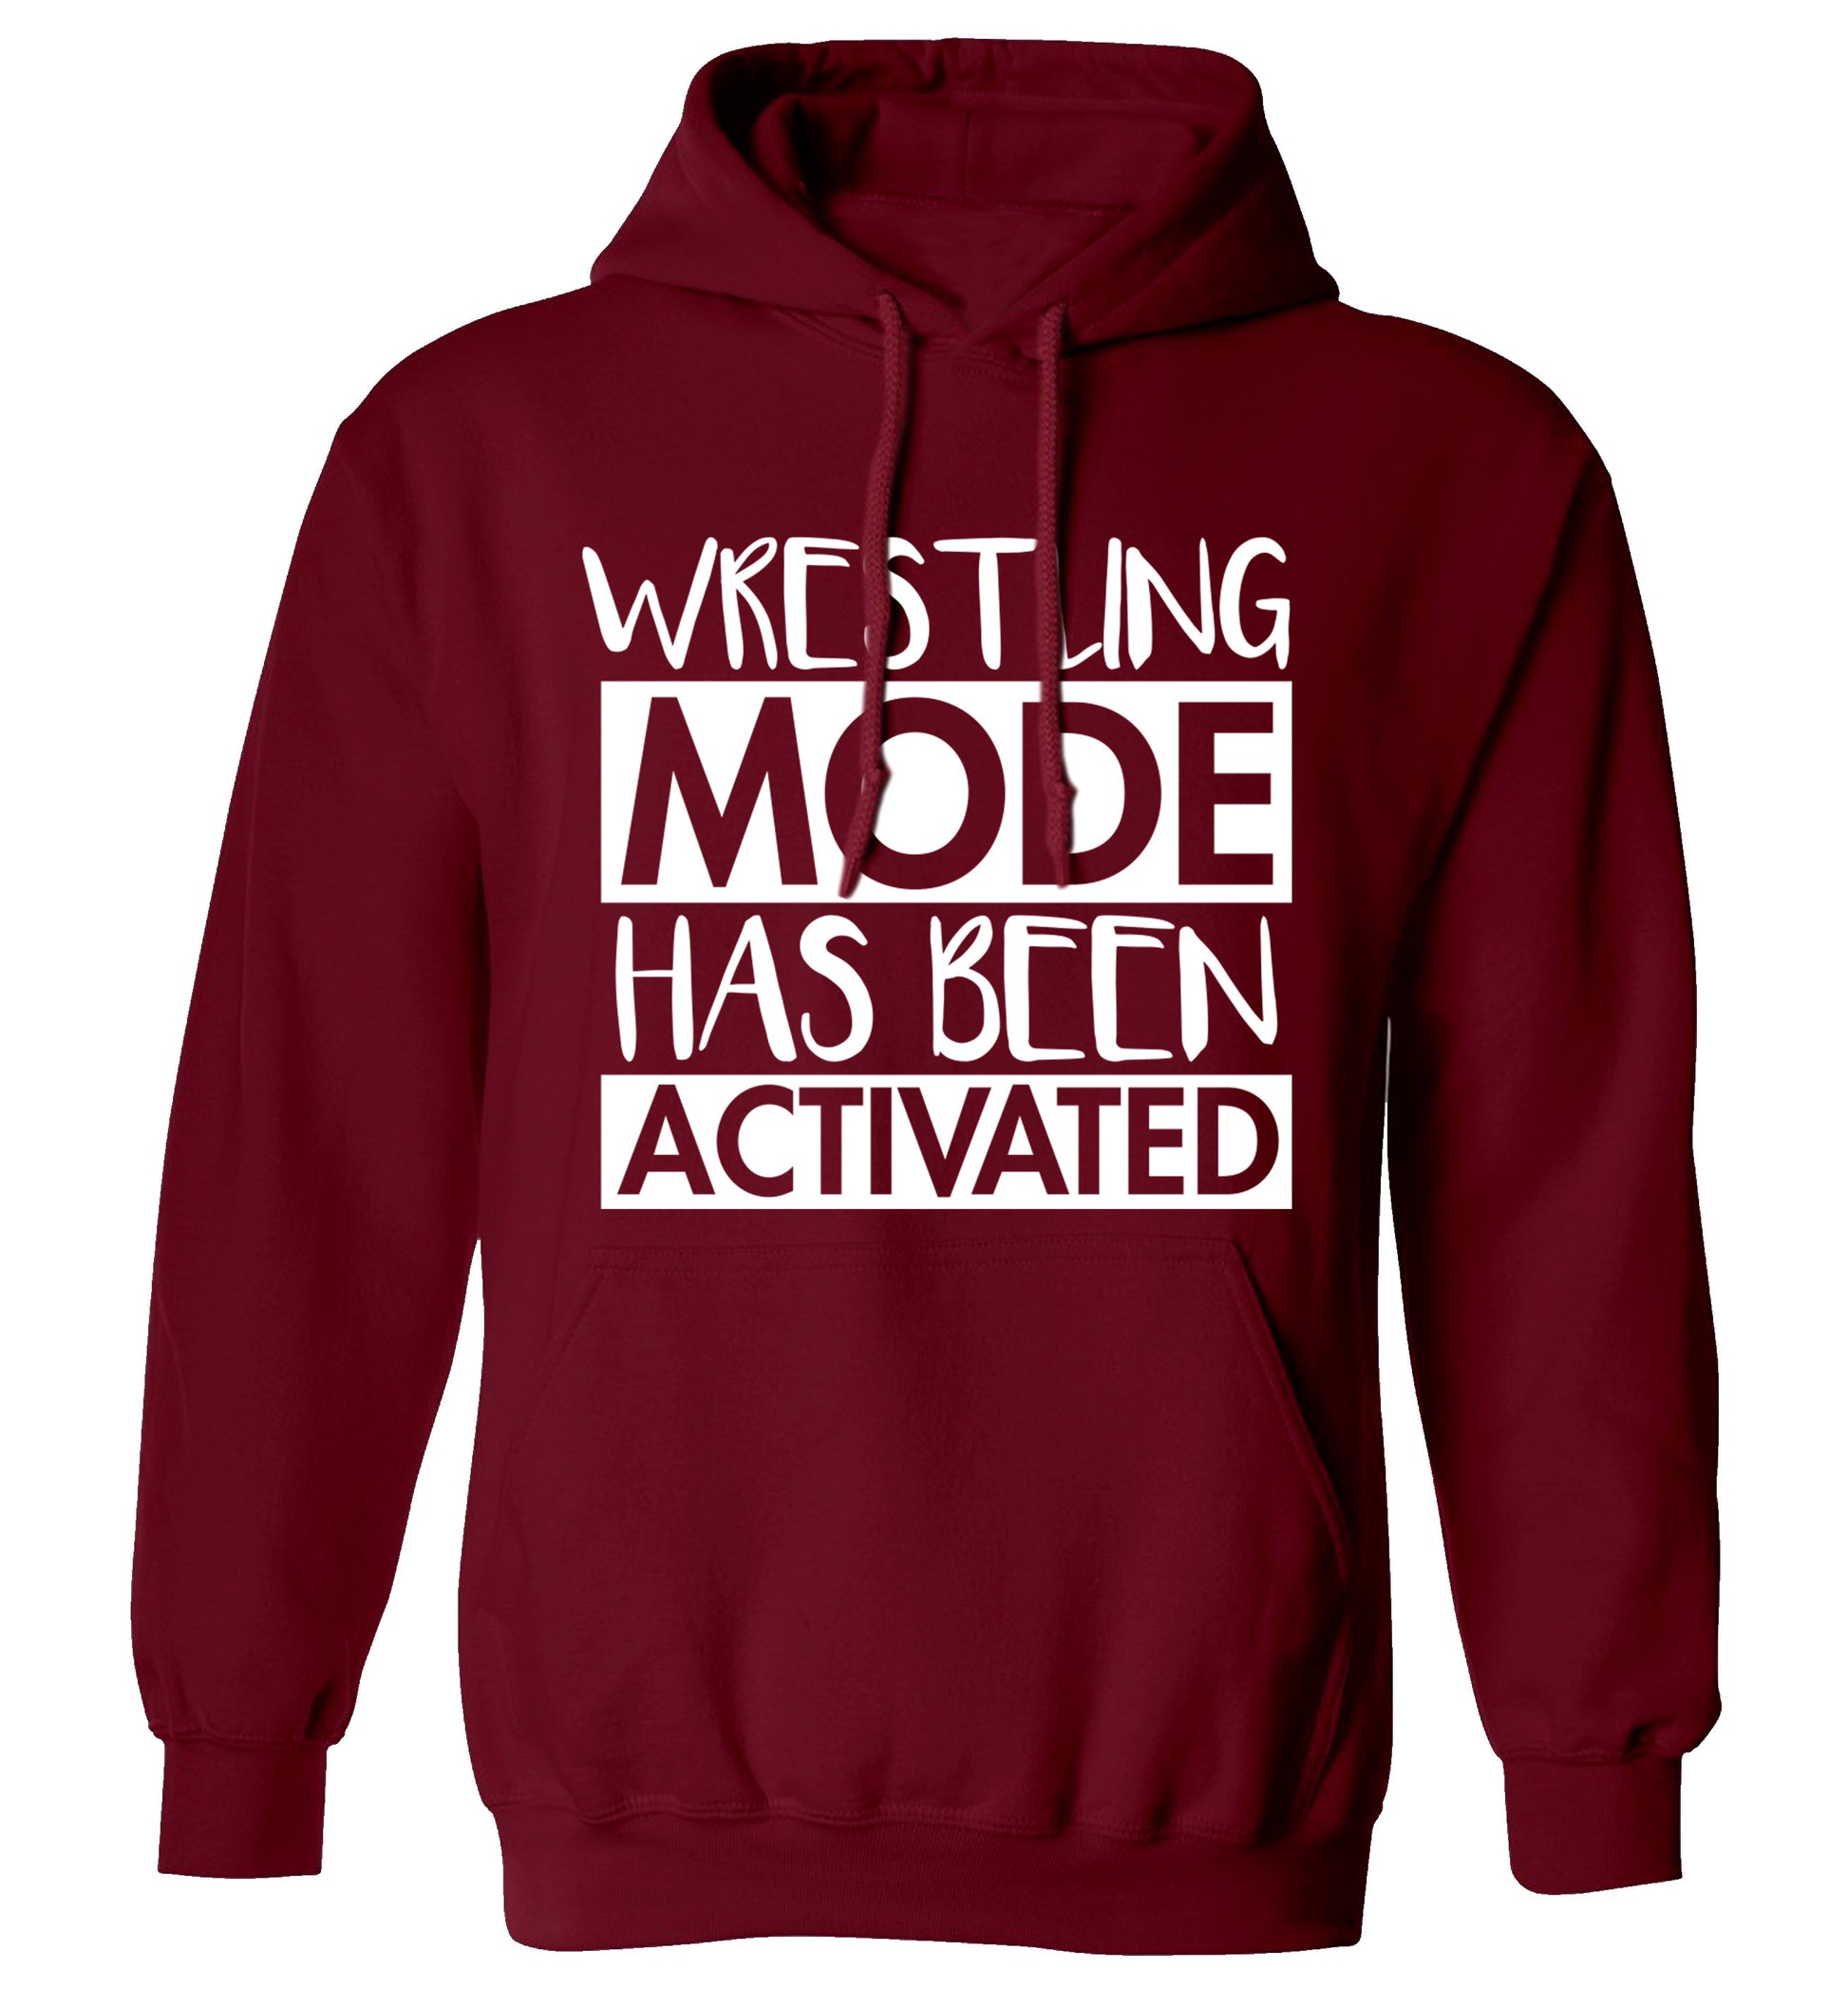 Wresting mode activated adults unisex maroon hoodie 2XL